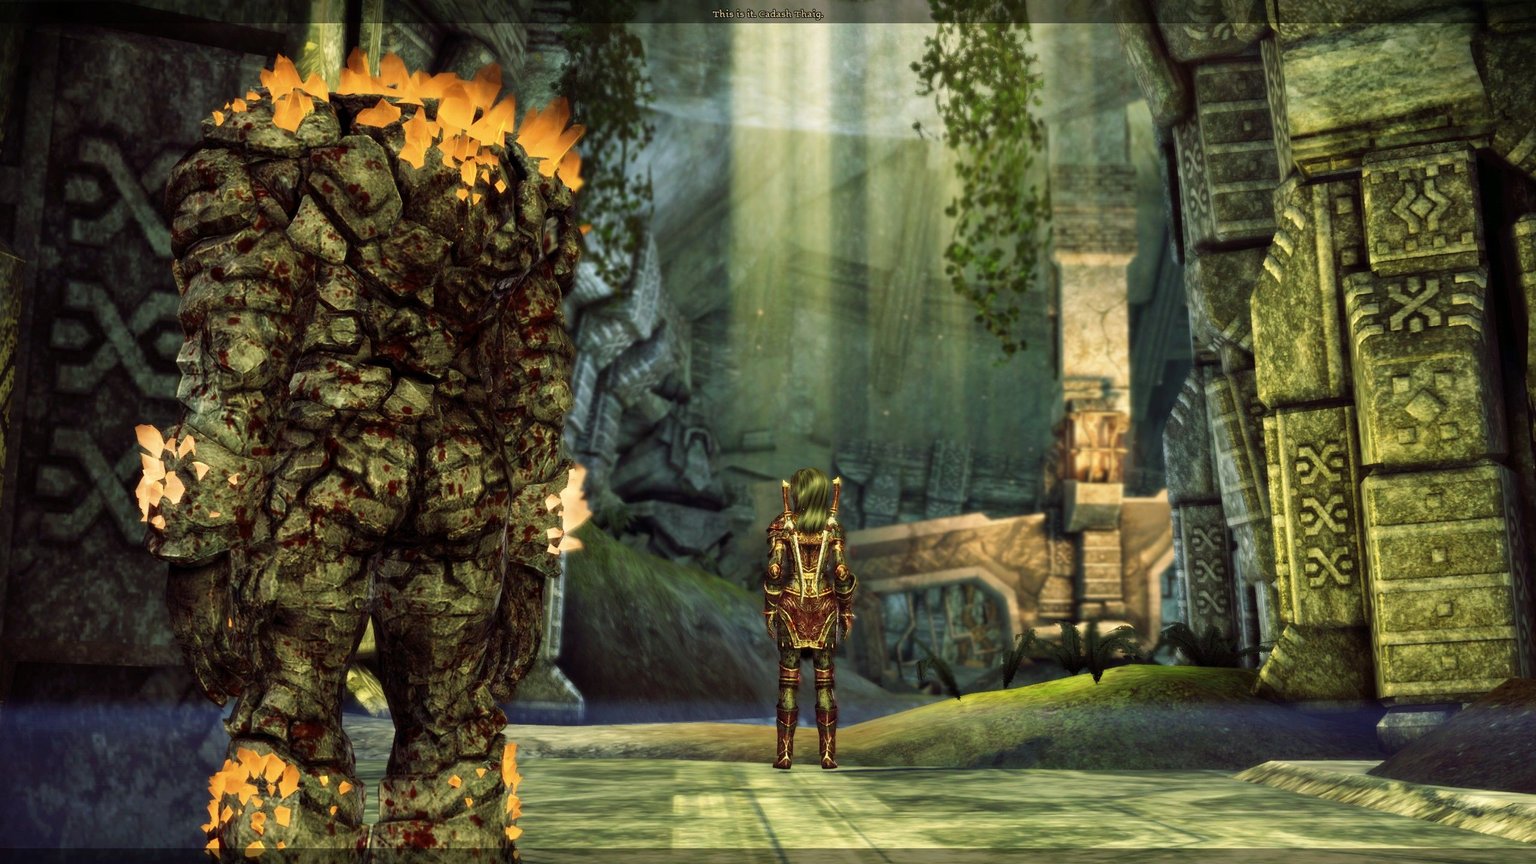 Dragon Age: Origins ~ tying up companion quests — Hive